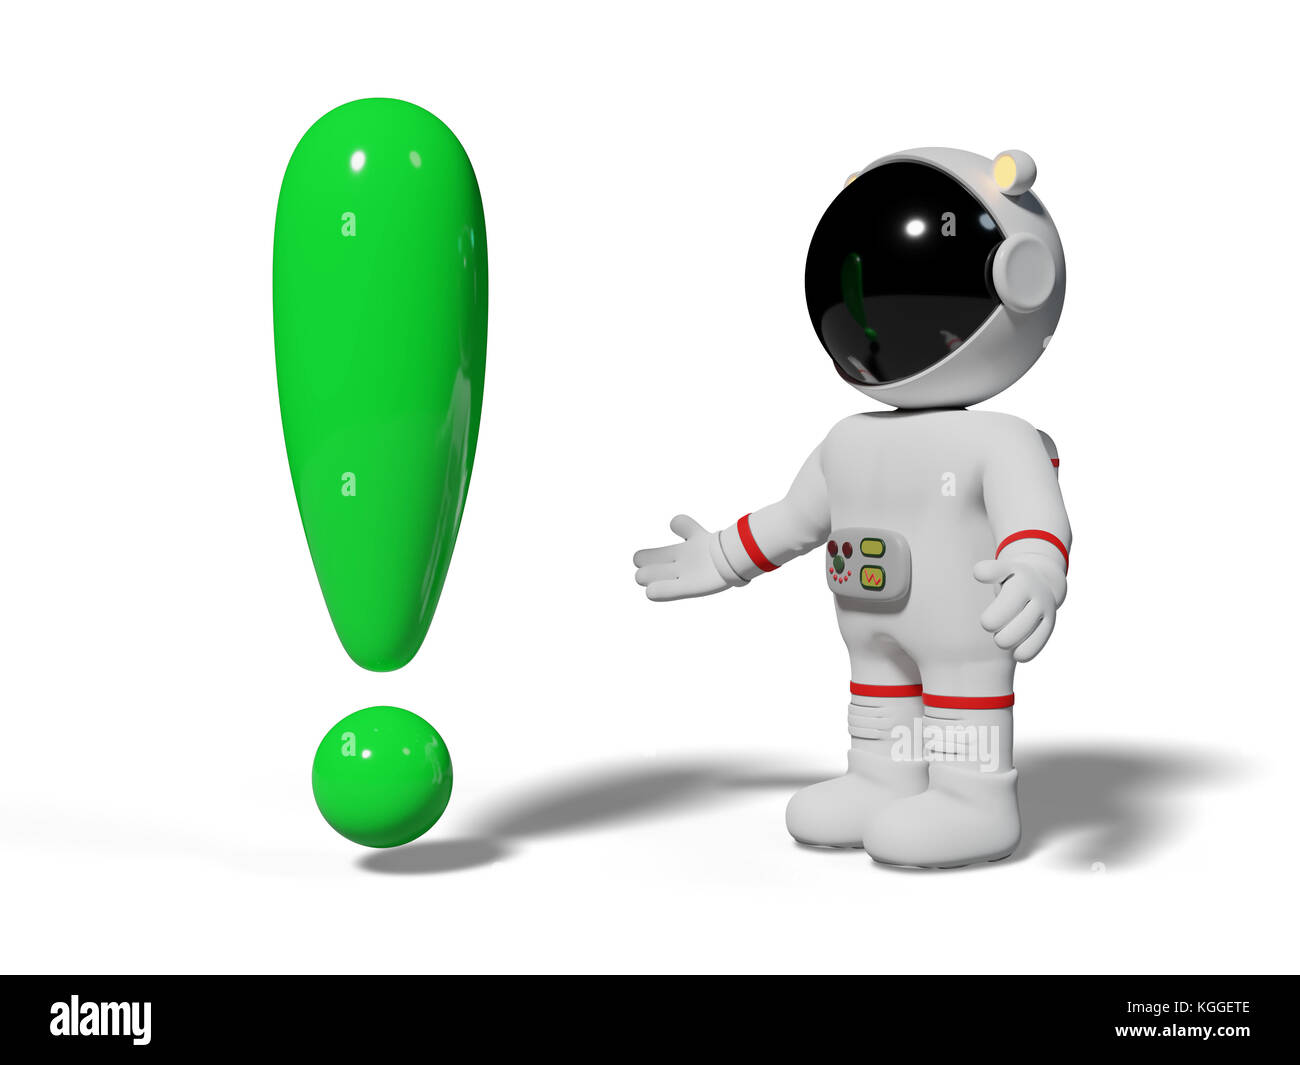 astronaut, 3d cartoon character looking at green exclamation mark (3d illustration isolated on white background) Stock Photo